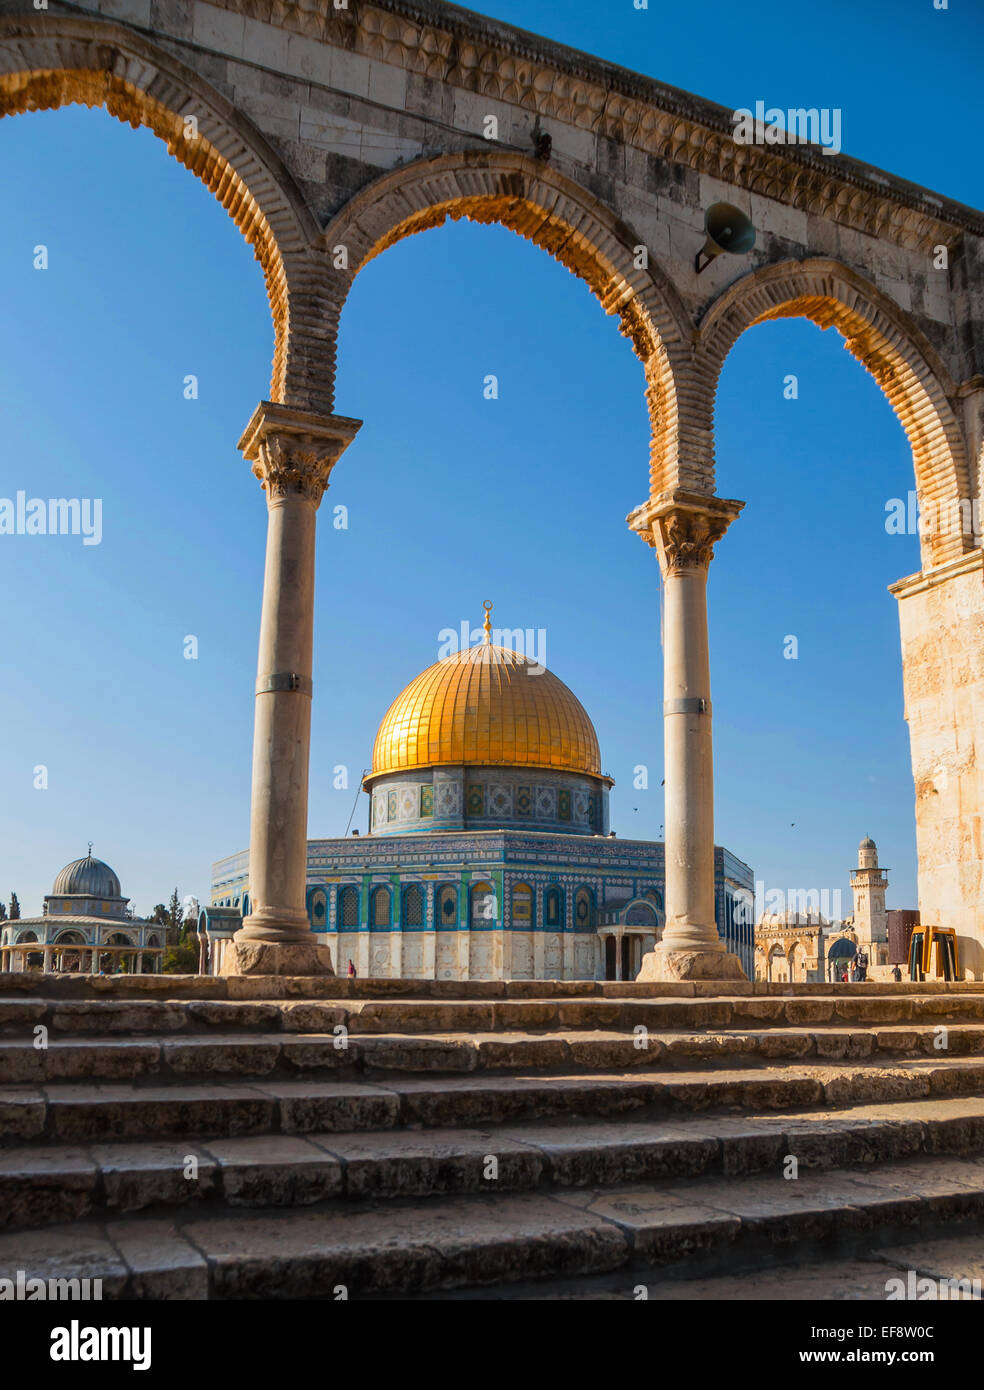 Israel, Jerusalem, Stone arches and Dome of the Rock Stock Photo